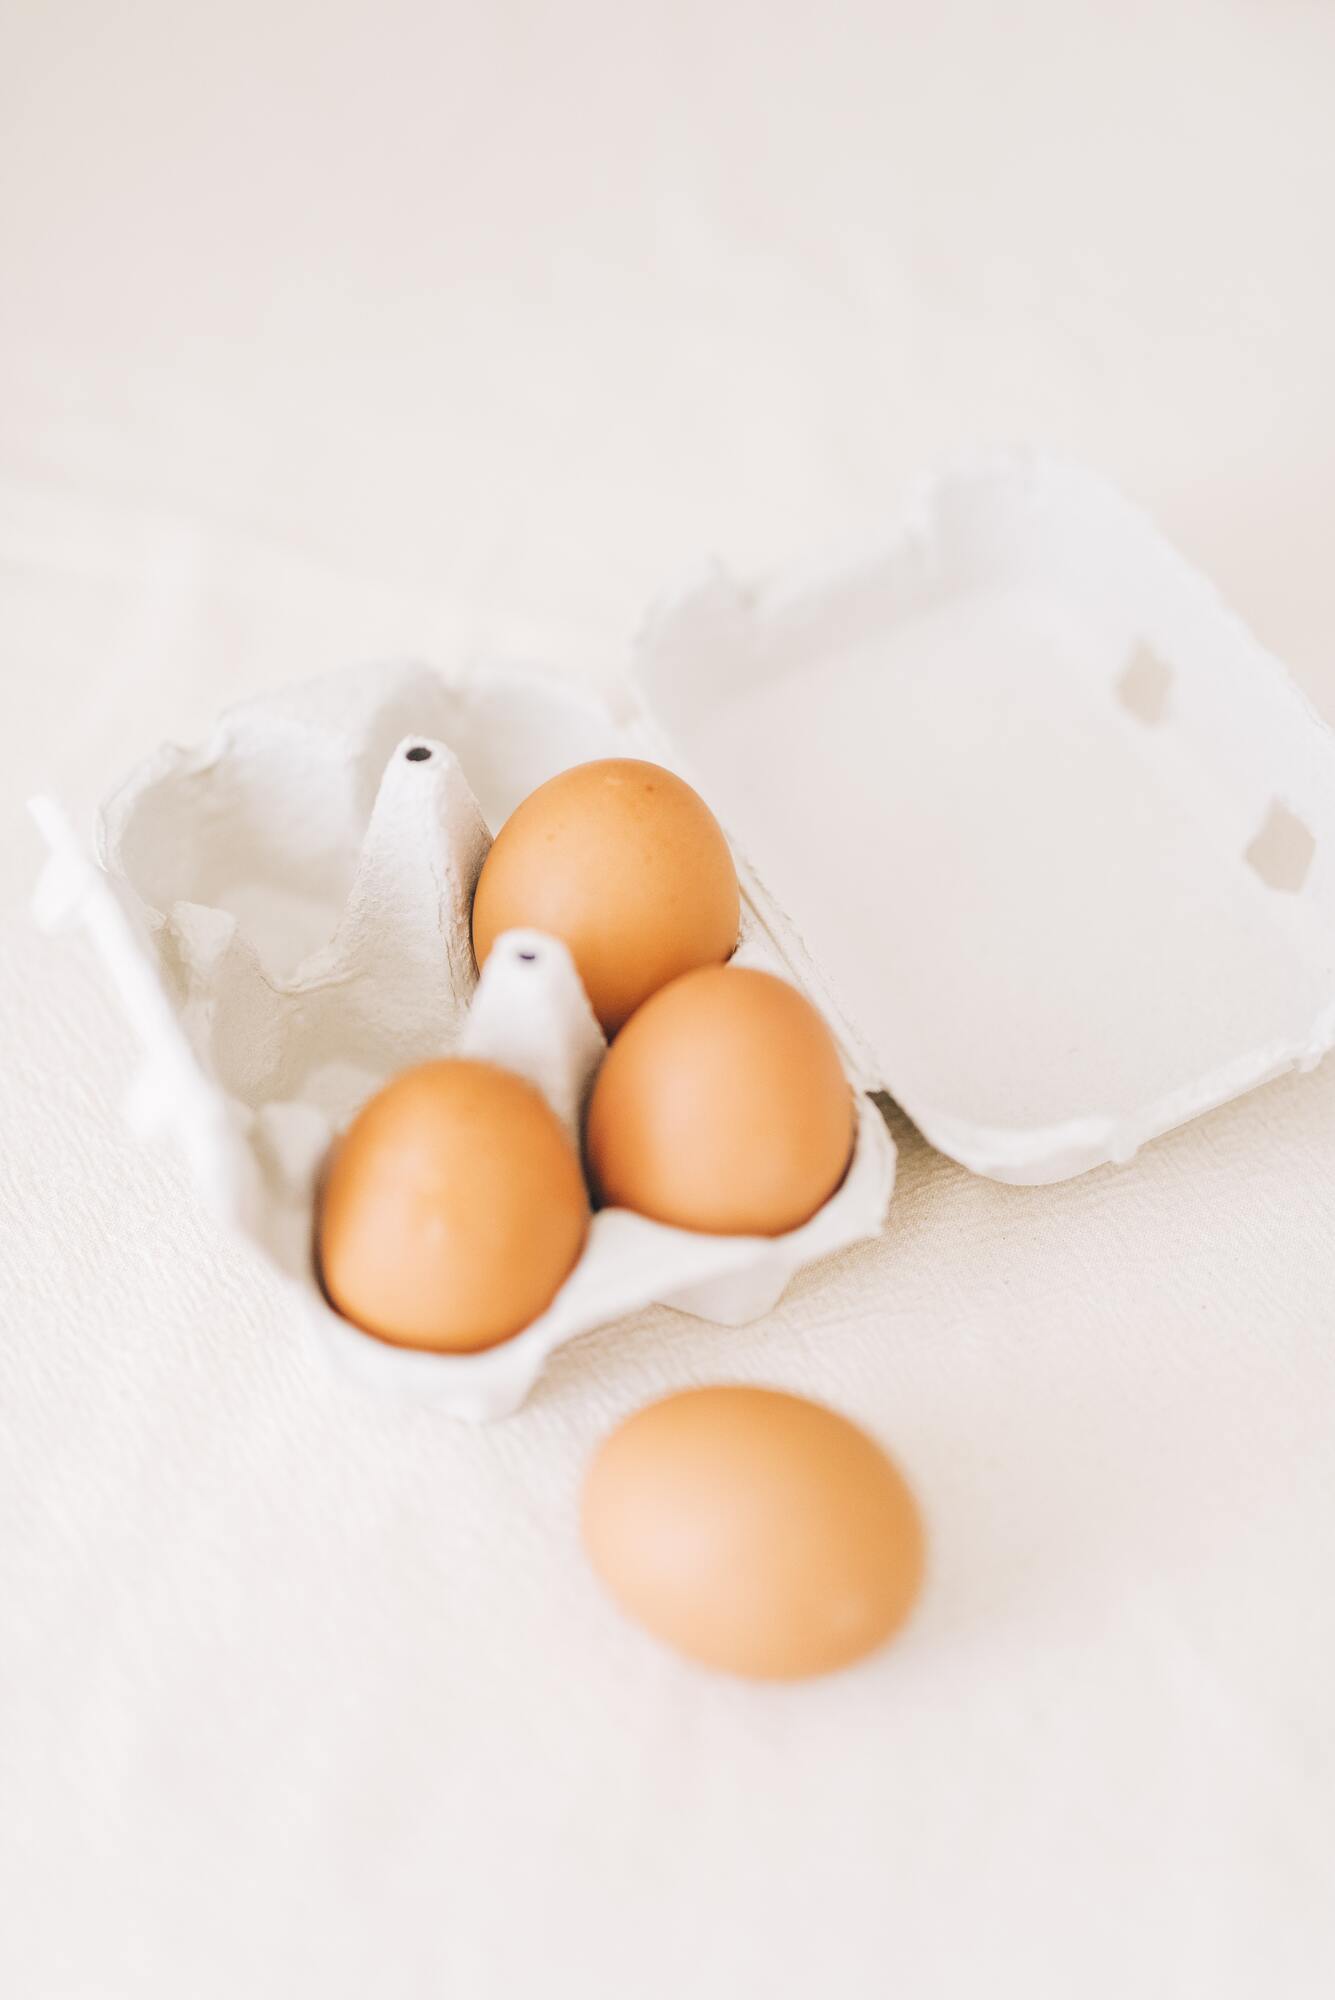 How to properly disinfect eggs